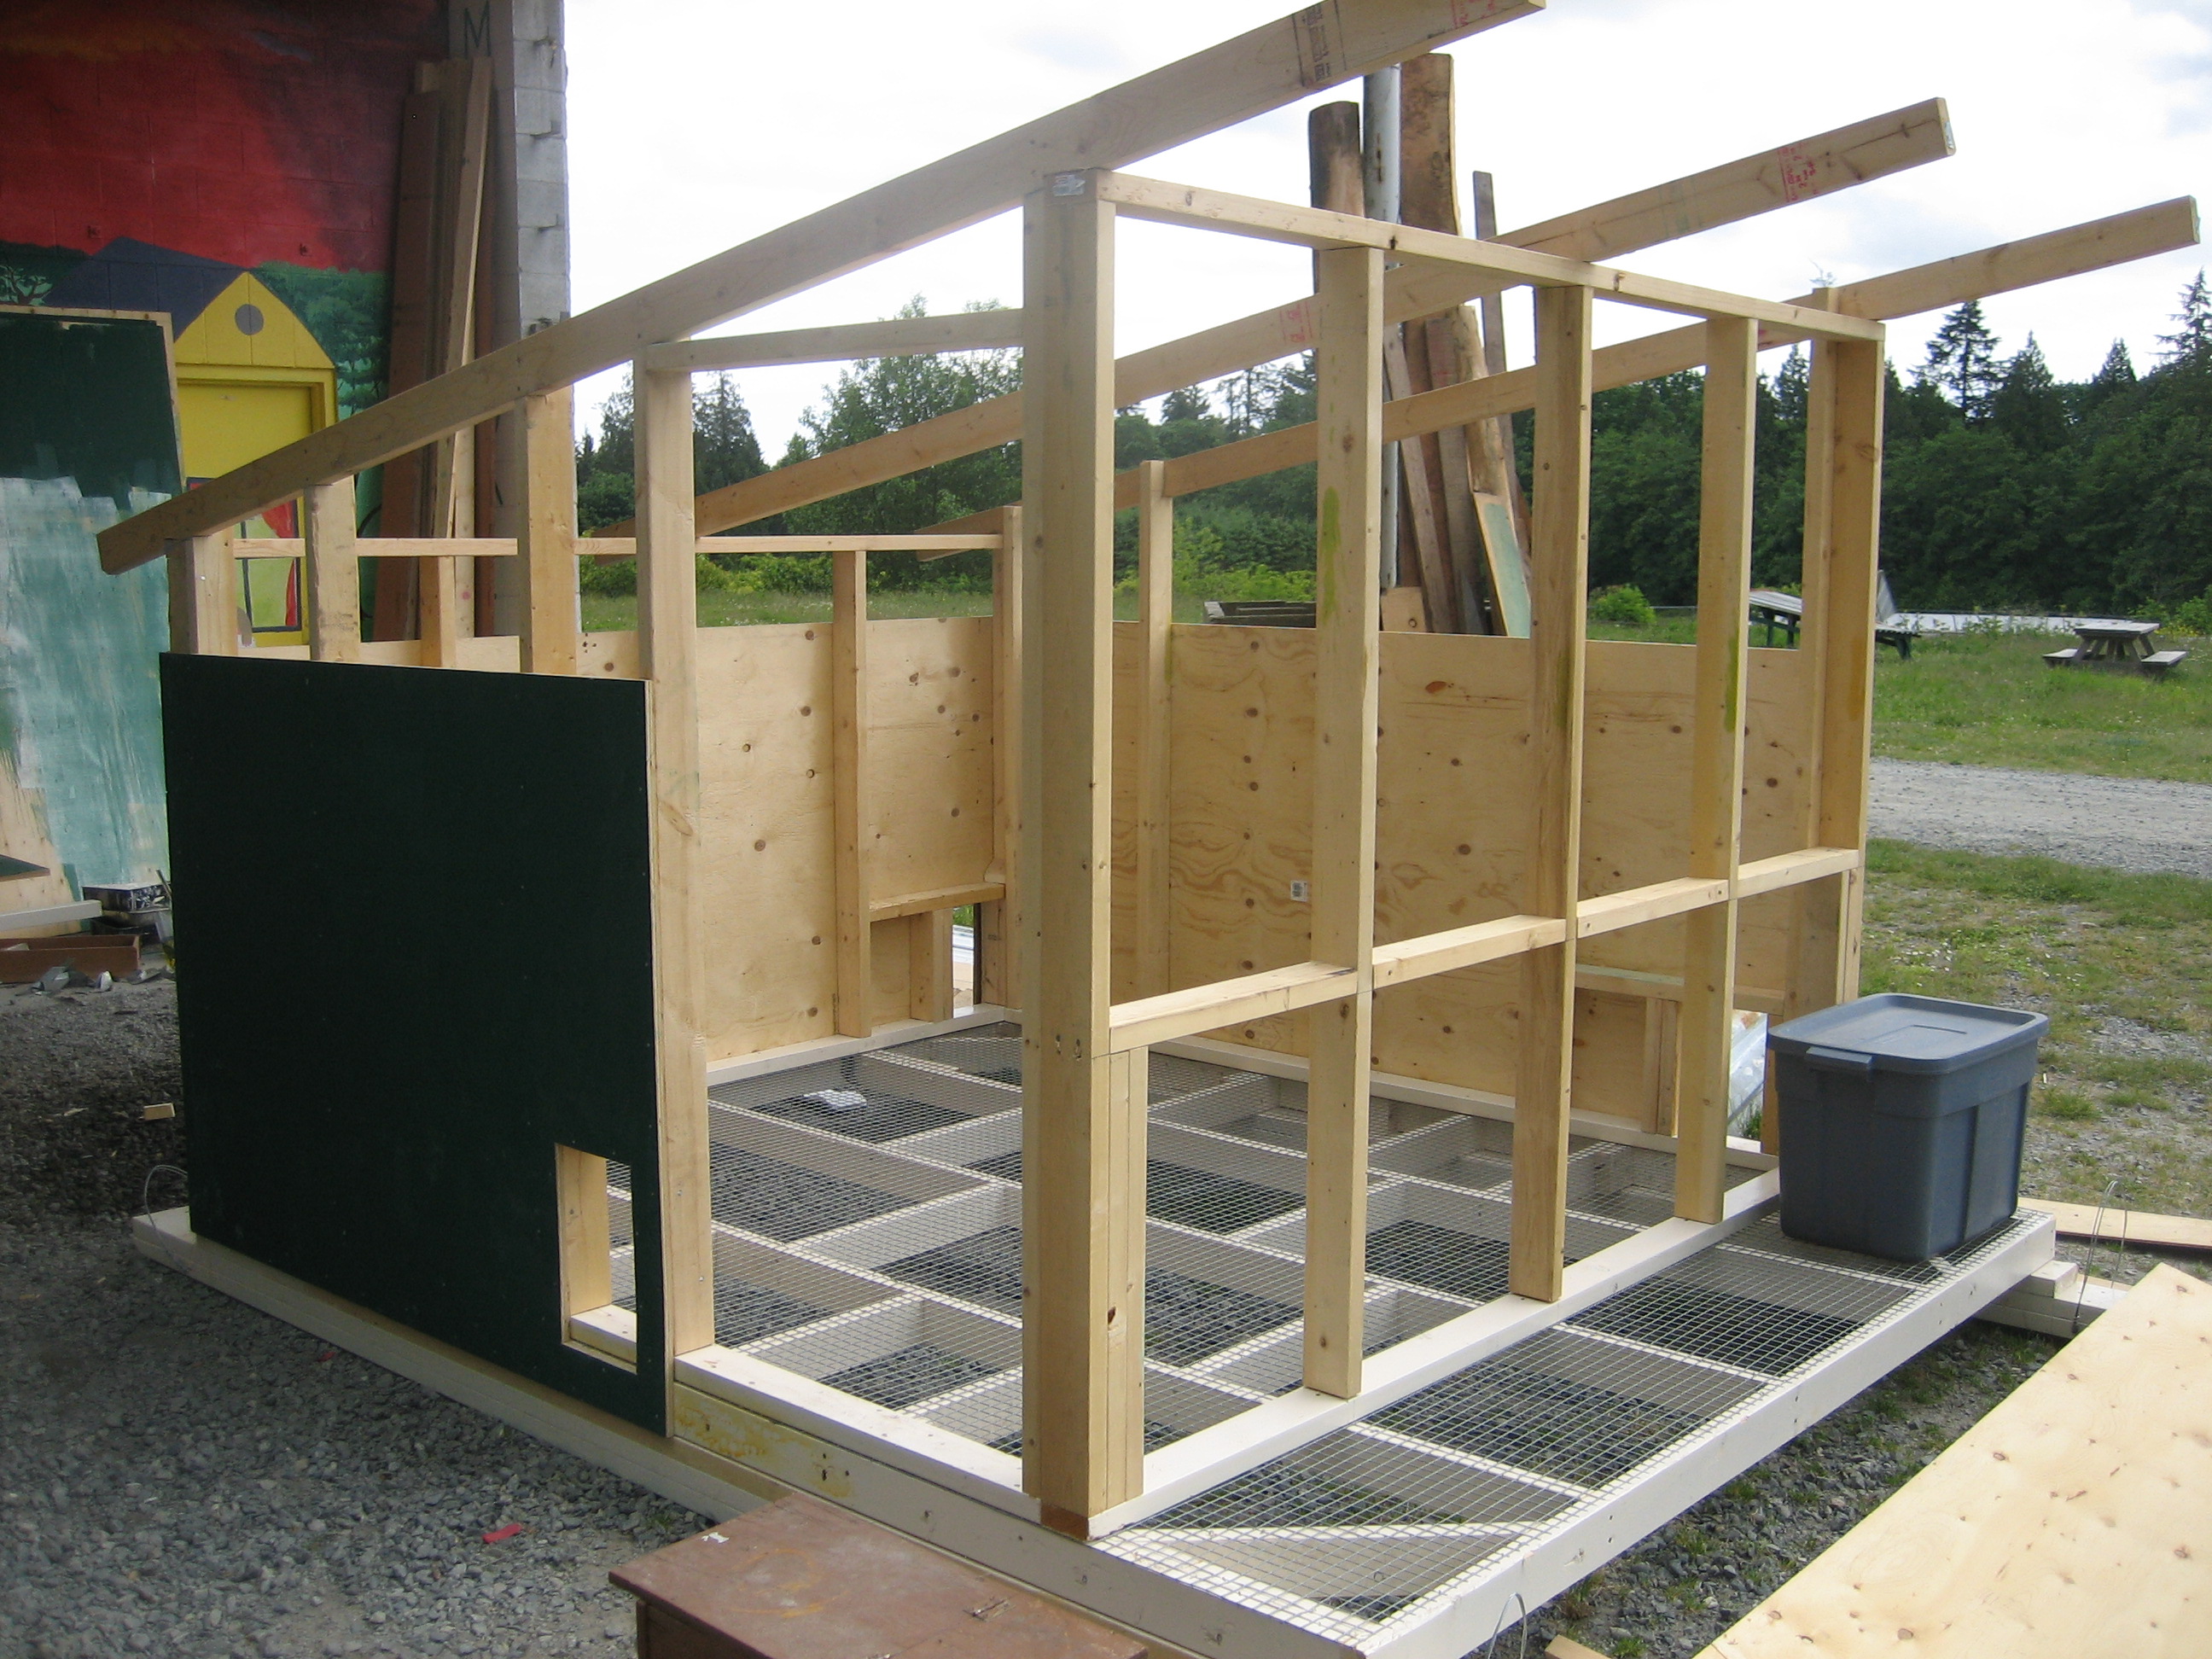 Construction plans for a Chicken Coop New and Clever Patterns for 